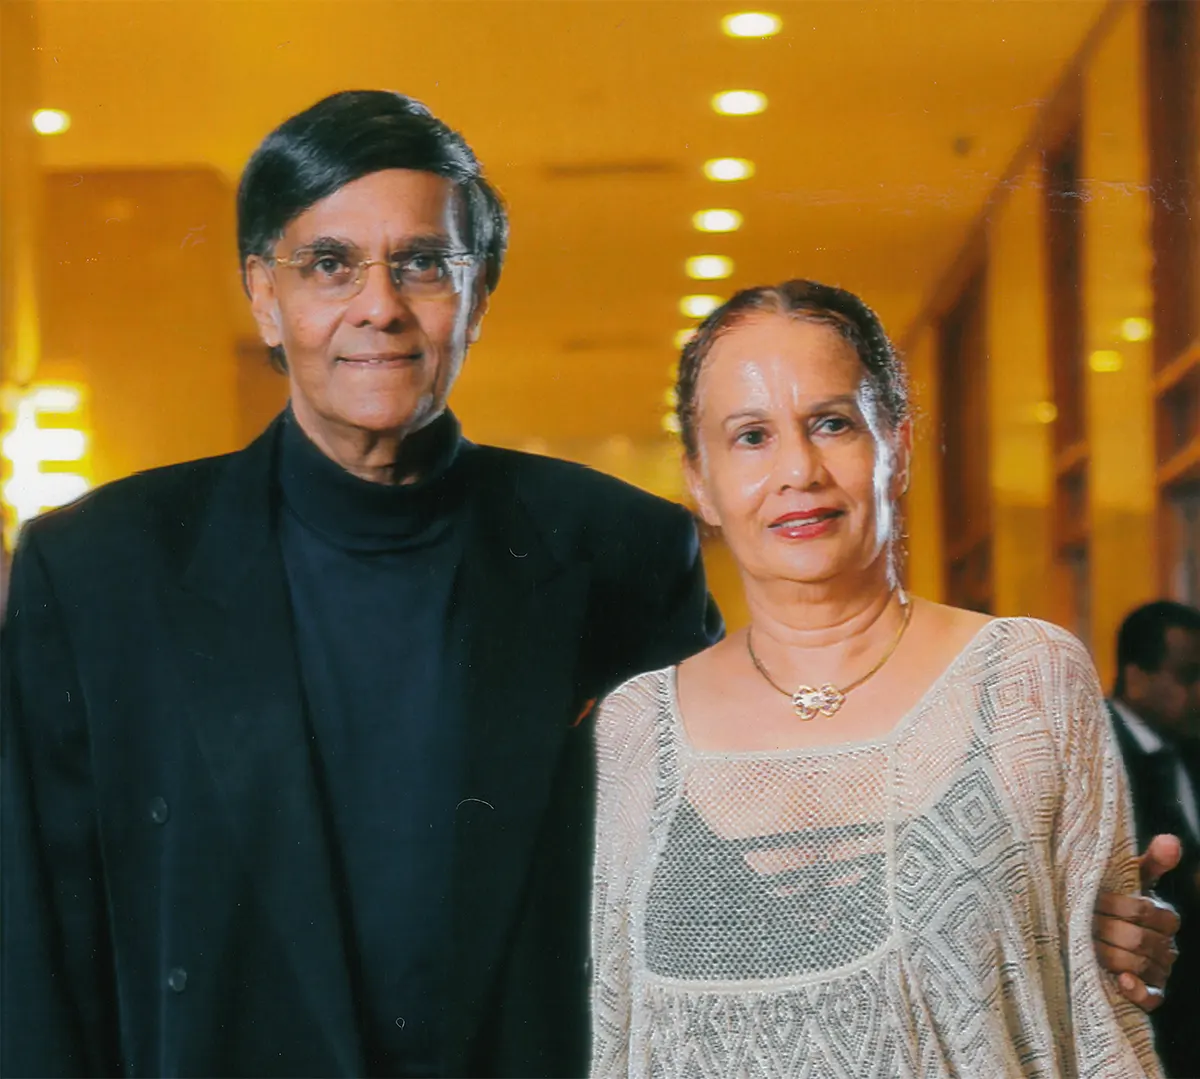 2012, Age 67. with wife Sria at dance